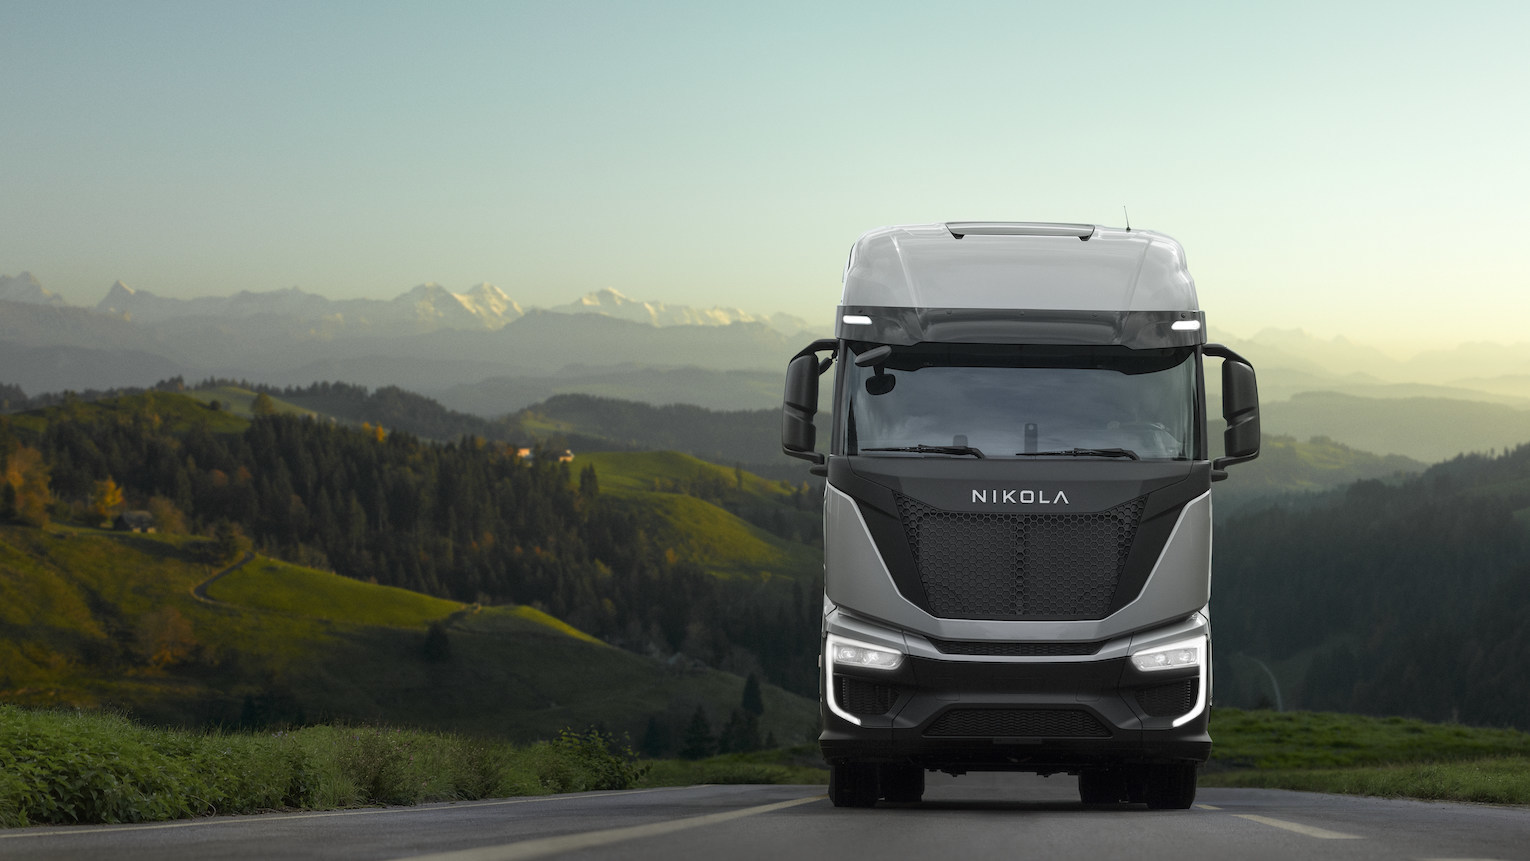 The European Nikola Tre FCEV in beta version made its debut at IAA Transportation 2022, offering a glimpse of the soon-to-come electric propulsion semi-truck for long hauling, and is expected to launch in the second half of 2023 in North America and first half of 2024 in Europe.